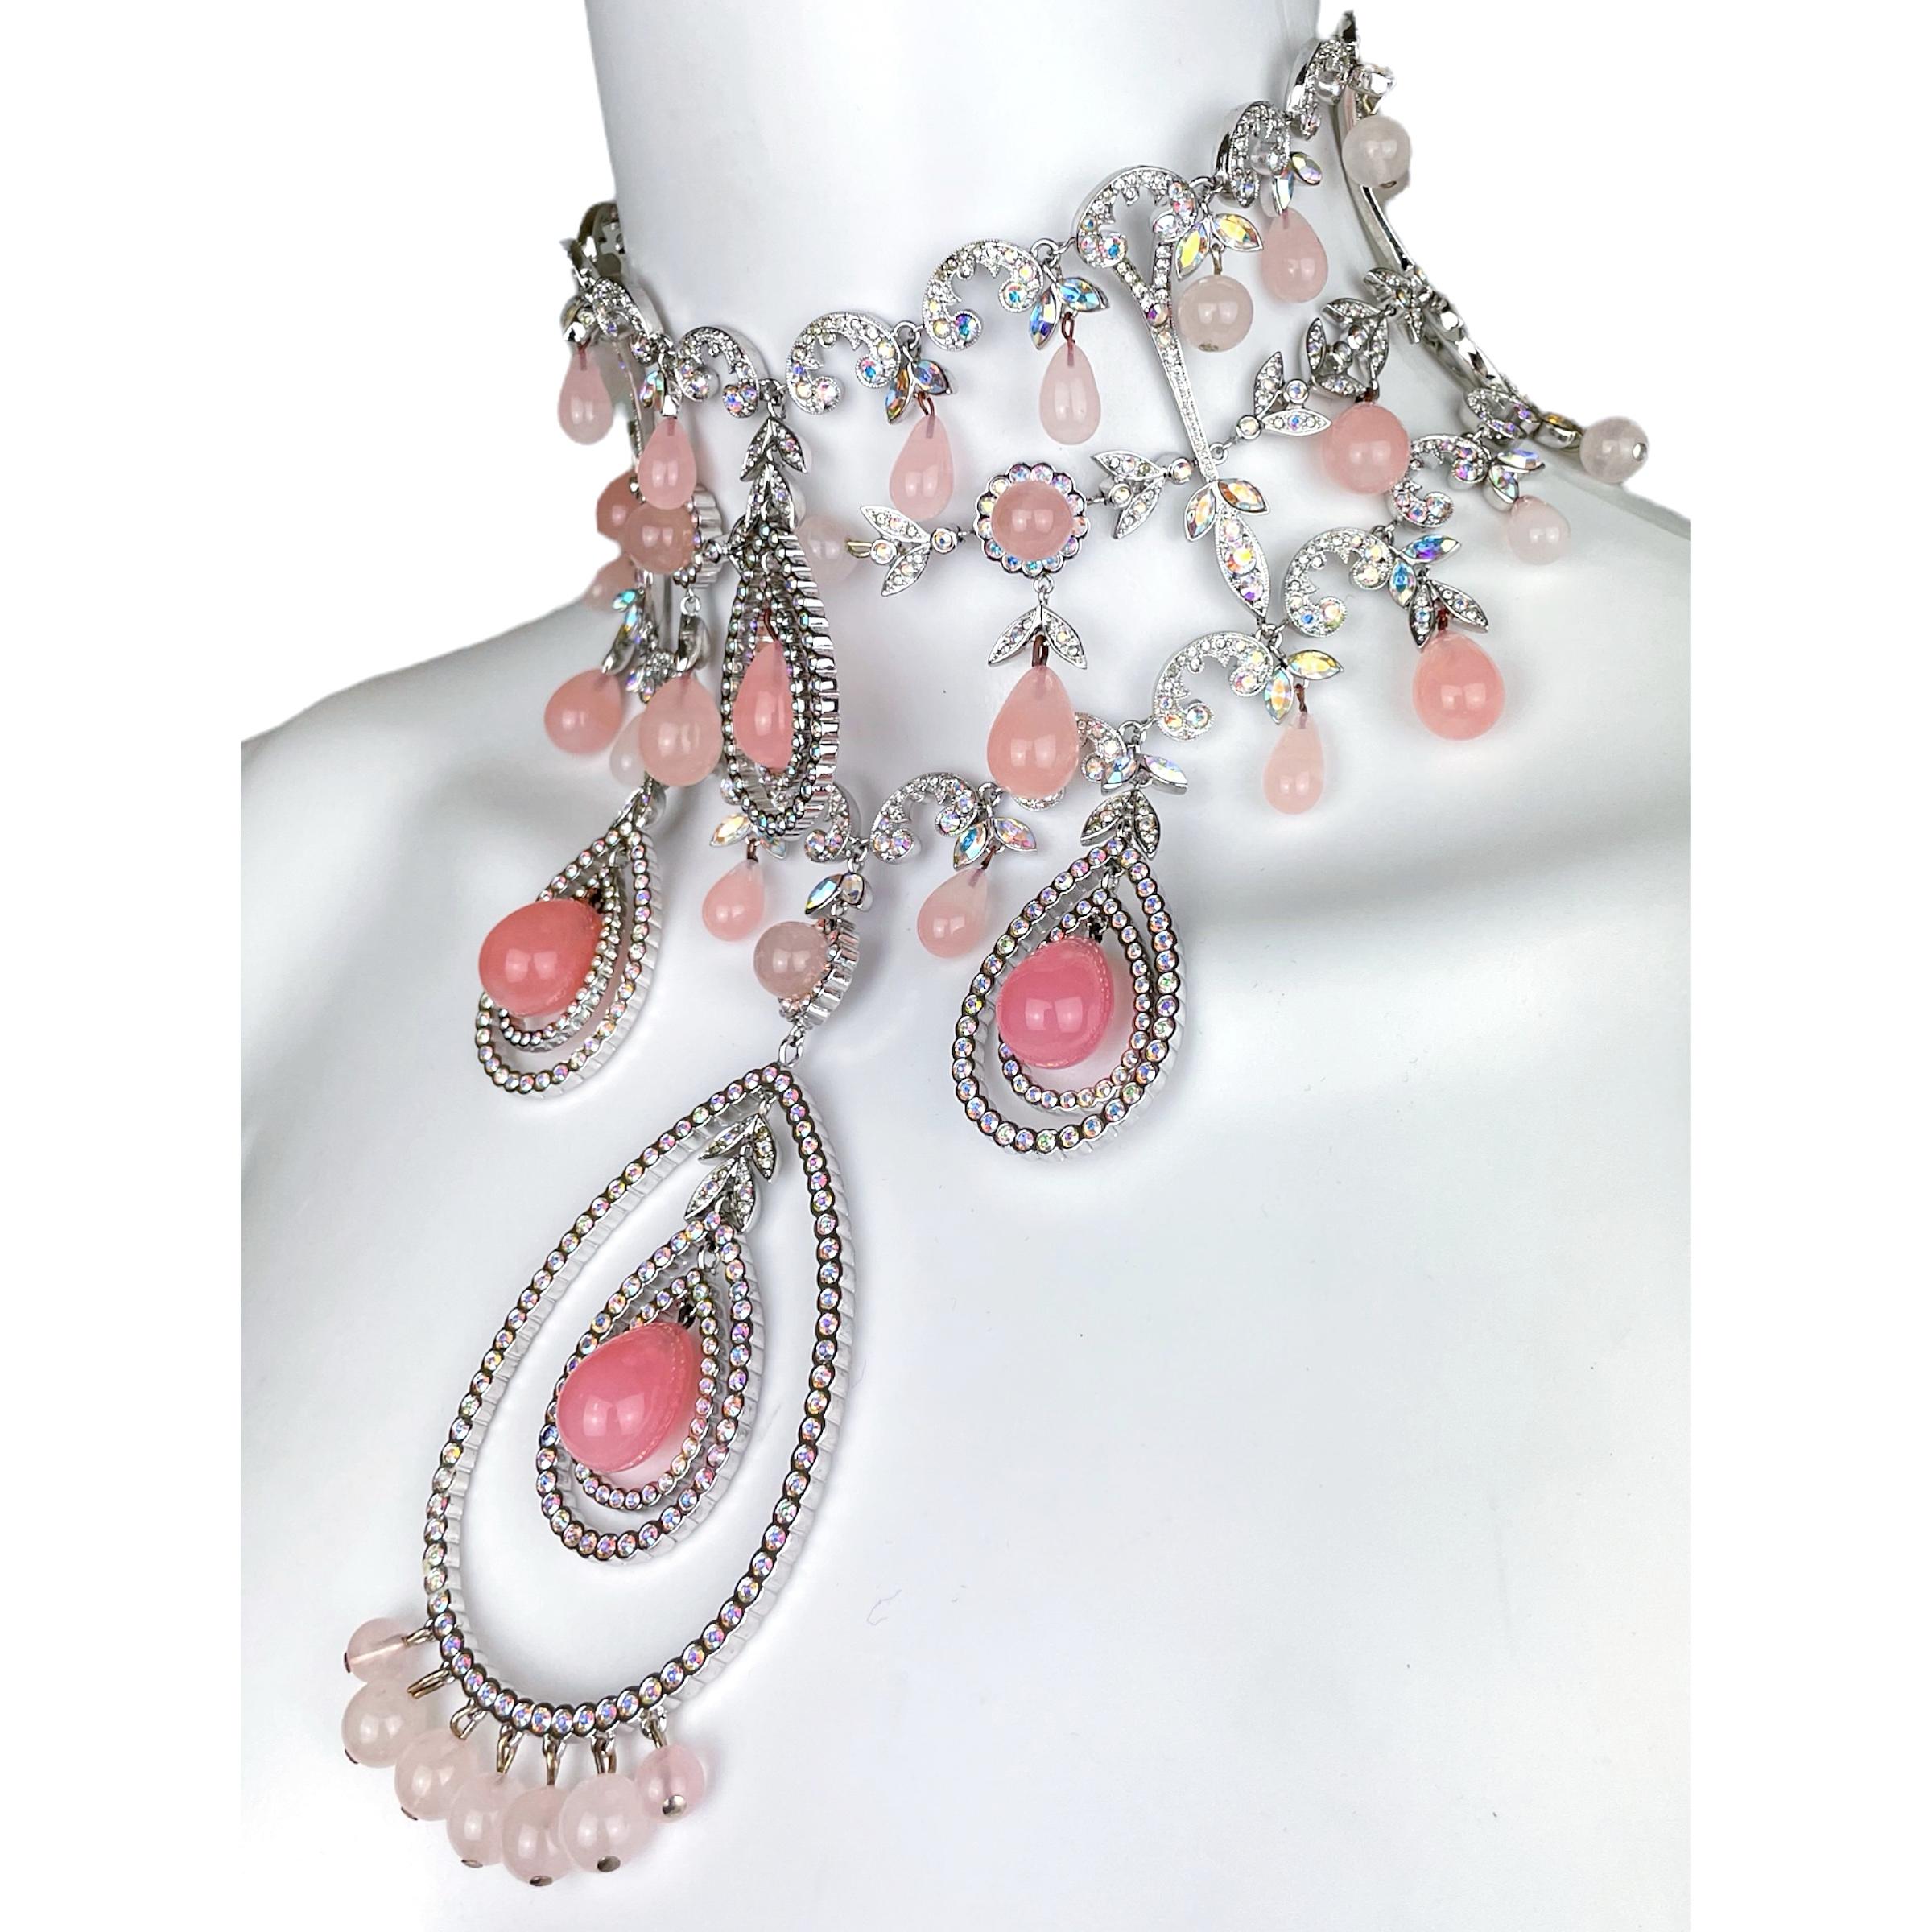 Christian Dior by John Galliano choker from Fall Winter 2003 Haute Couture collection as seen on the runway. The choker comes with matching pendant clip earrings. The earrings are missing two crystals (as shown in pictures).  Choker length is 36cm